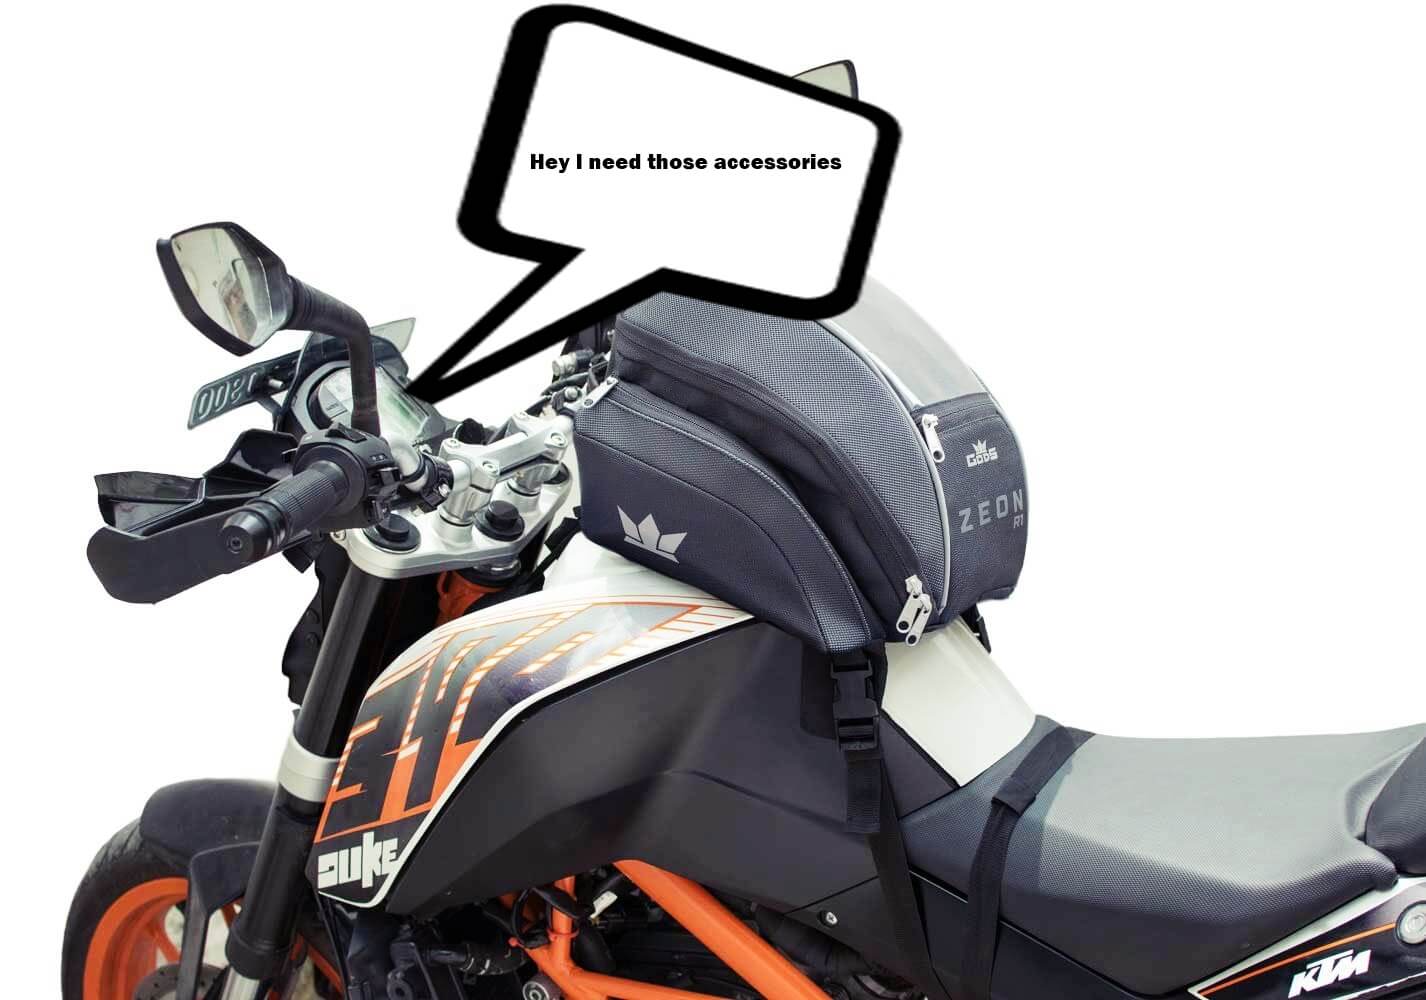 The 12 best motorcycle accessories for Indian bikers.